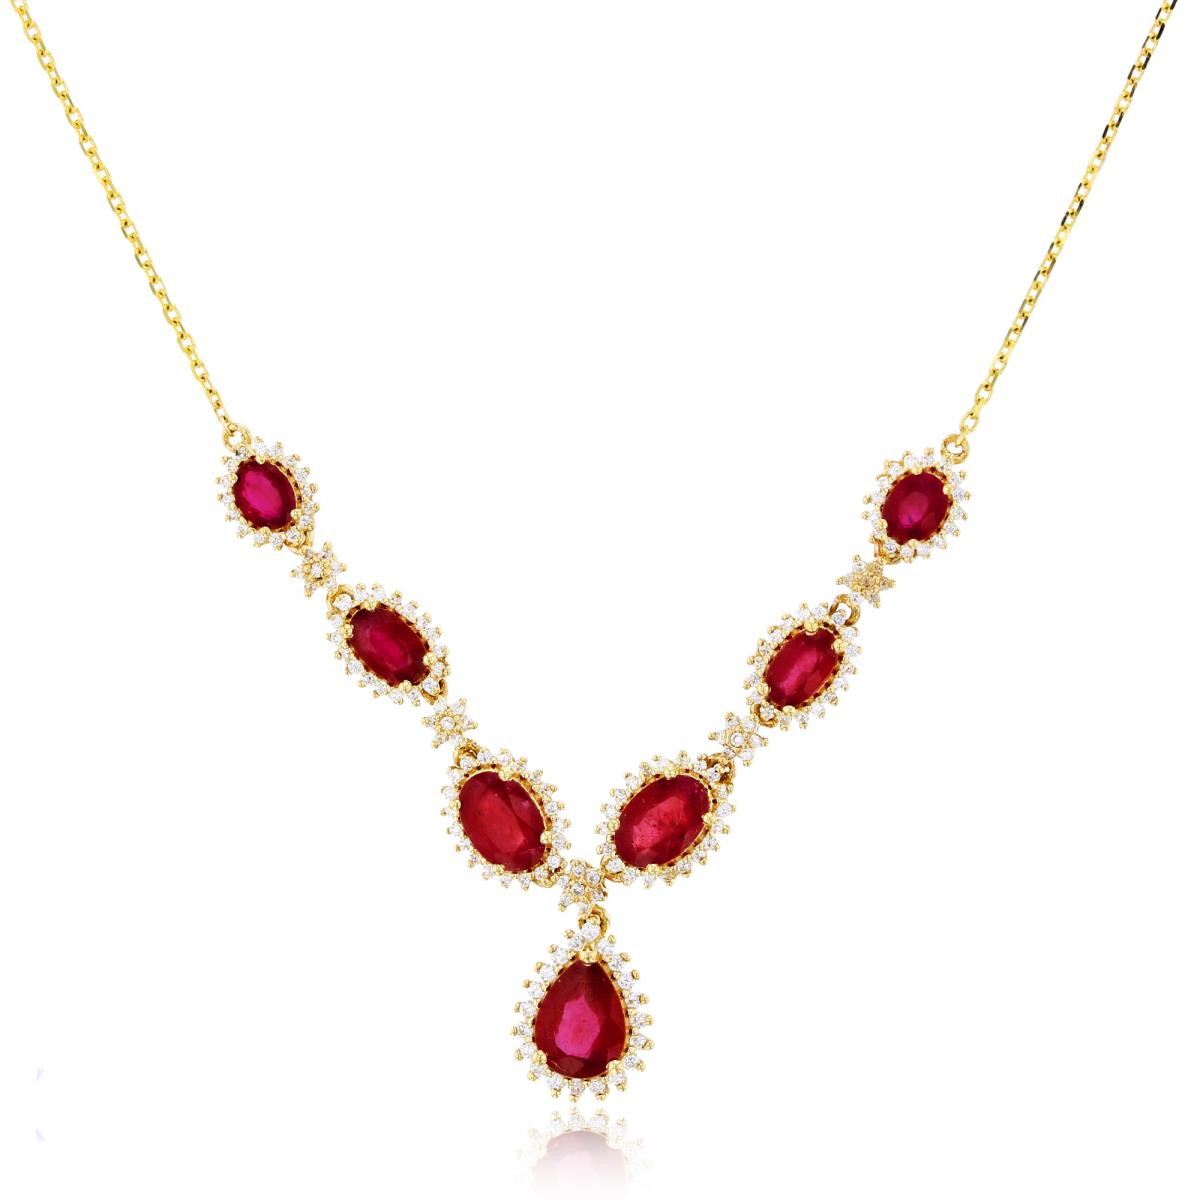 10K Yellow Gold 0.5 CTTW Rnd Diamonds & PS/Ov Ruby Dangling 18"+2"ext Y-Necklace